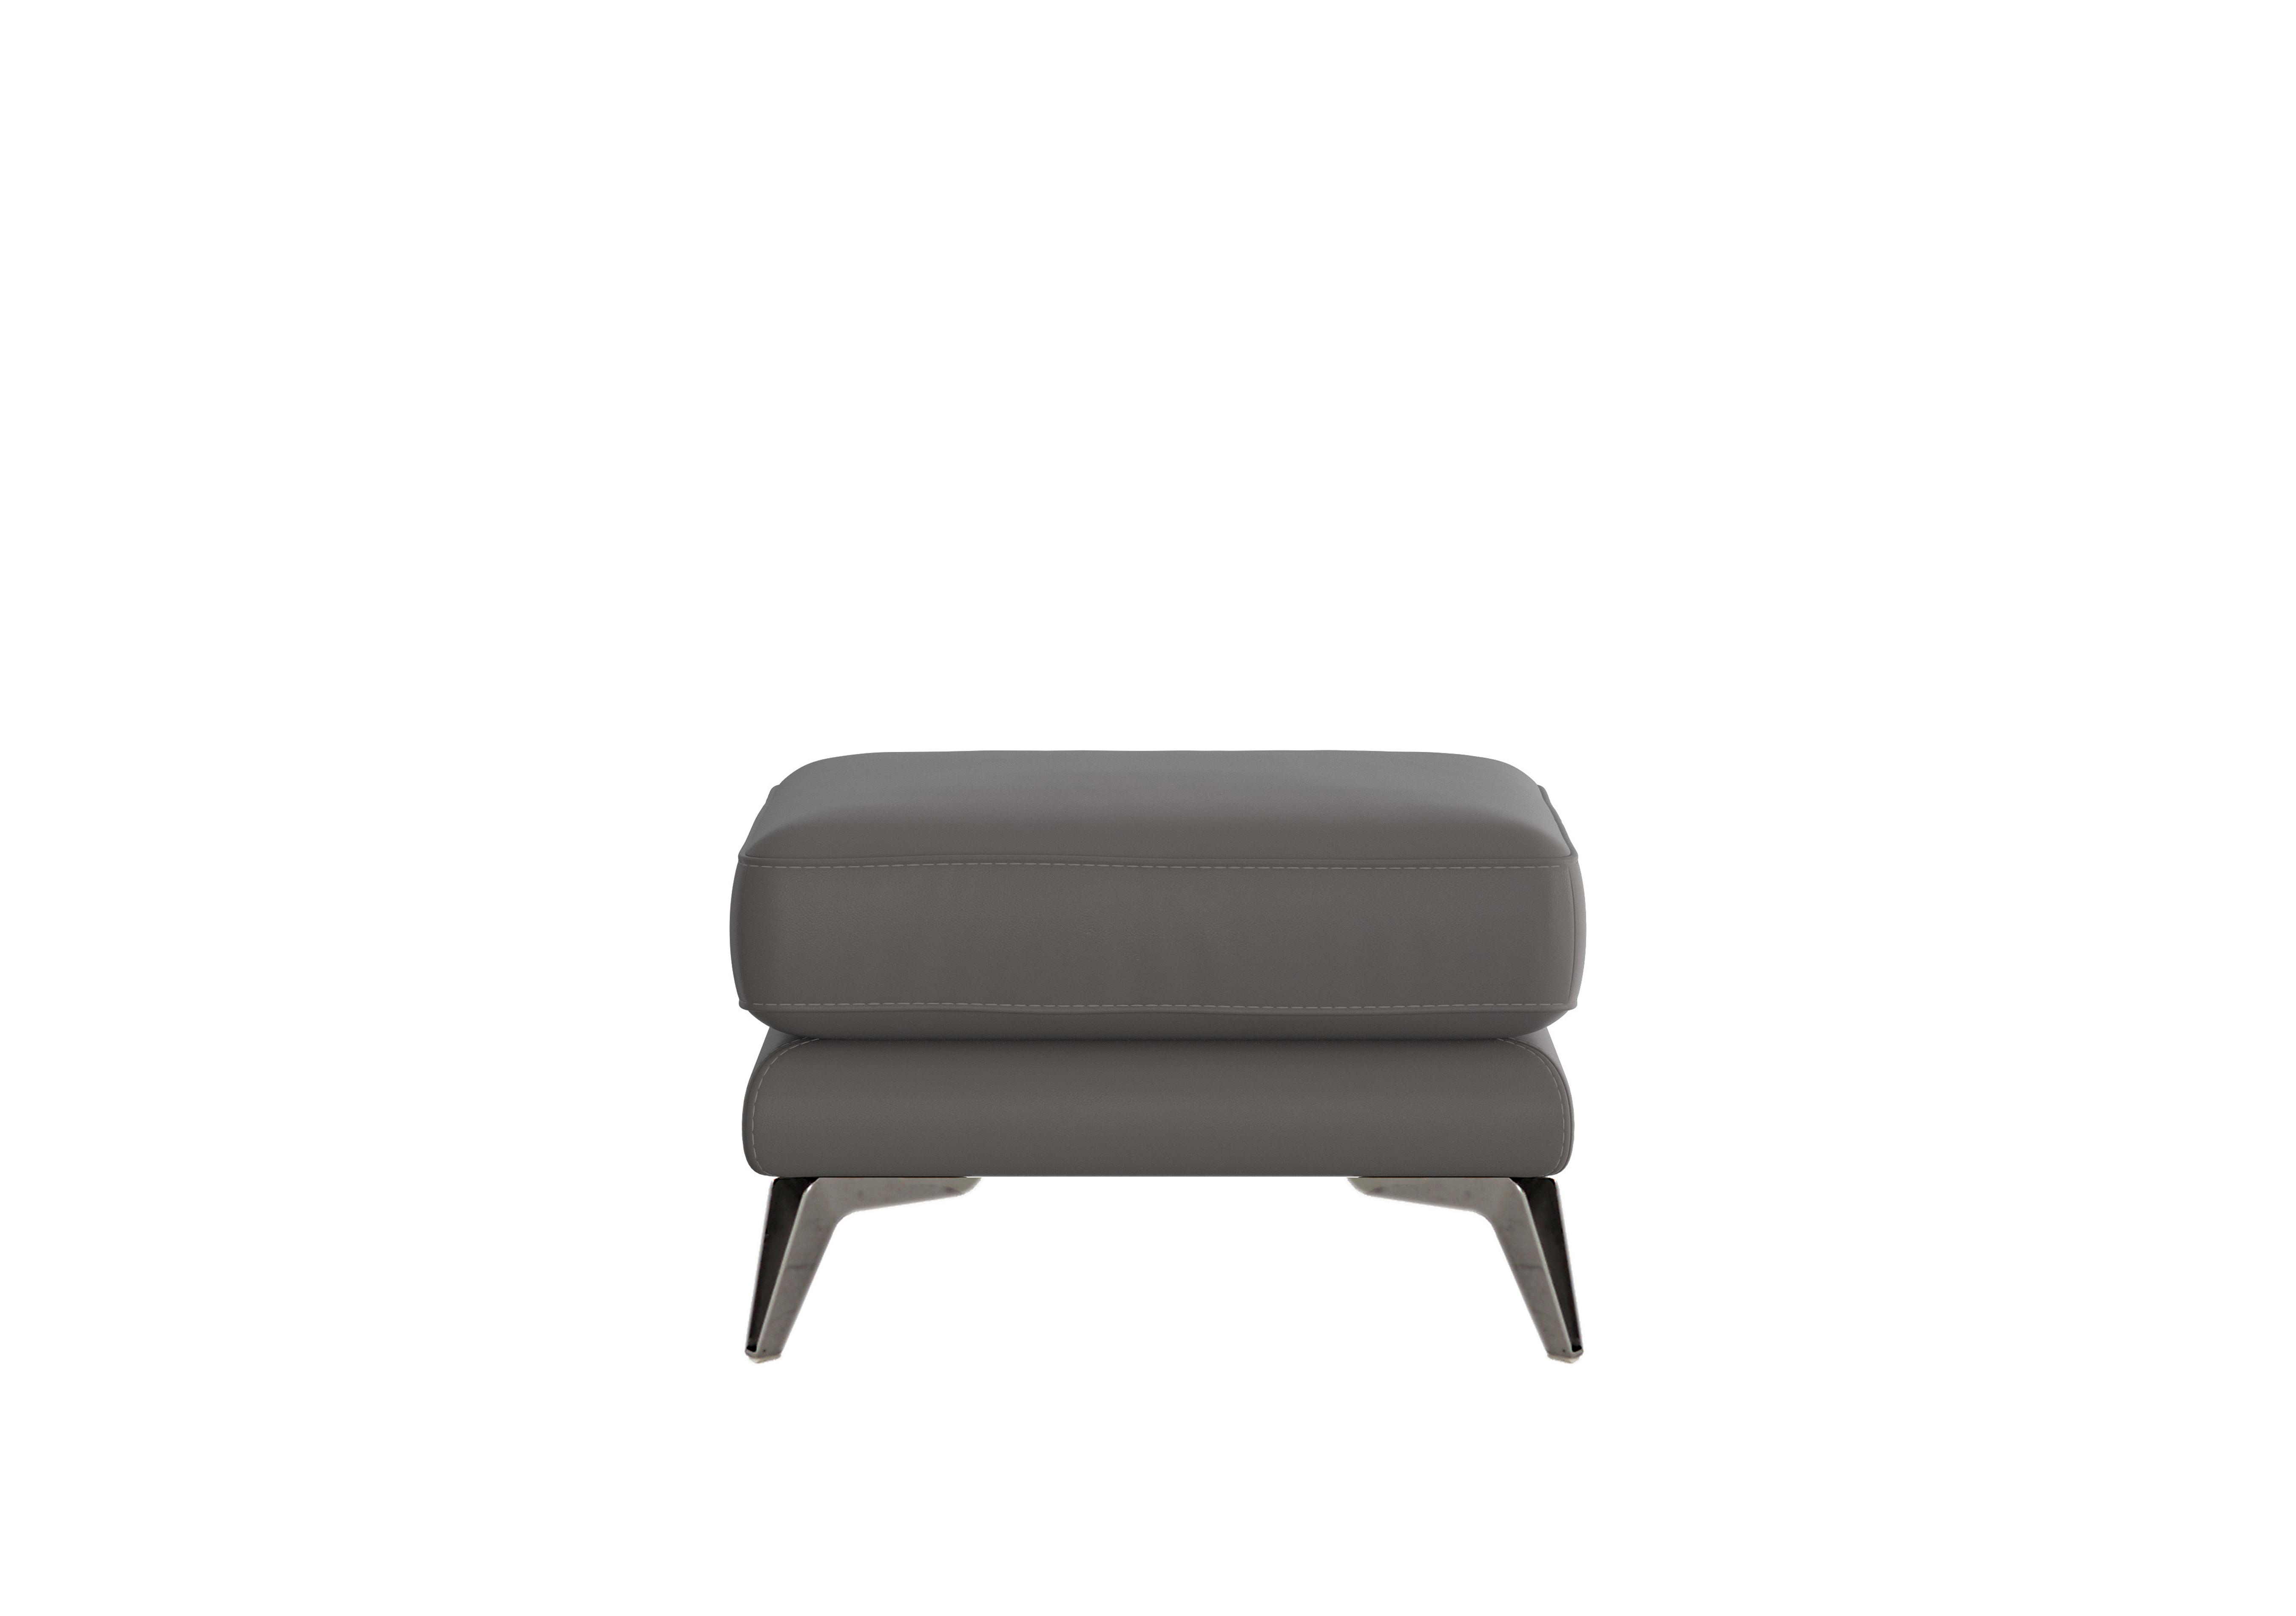 Contempo Leather Footstool in Bv-042e Elephant on Furniture Village